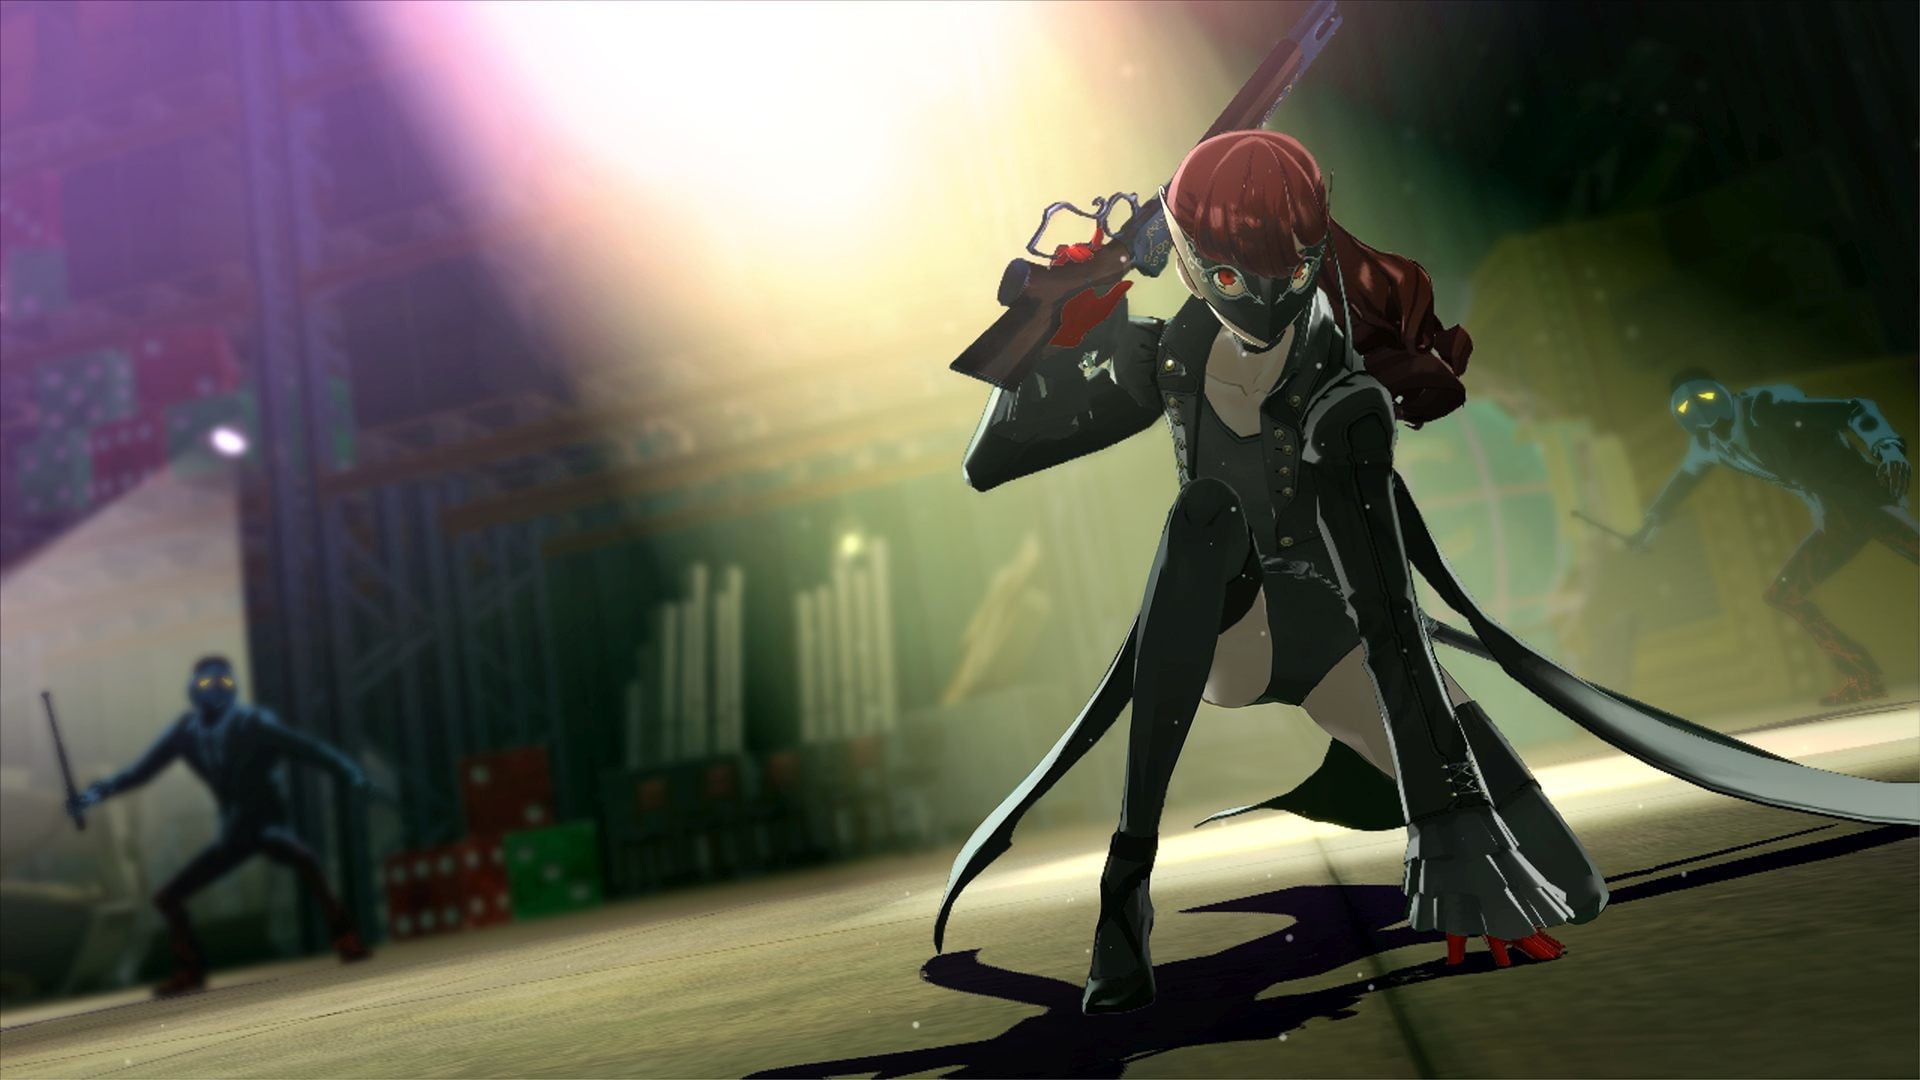 Persona 6 Will be Semi-Open World and Feature “More Fluid” Social Links – Rumour